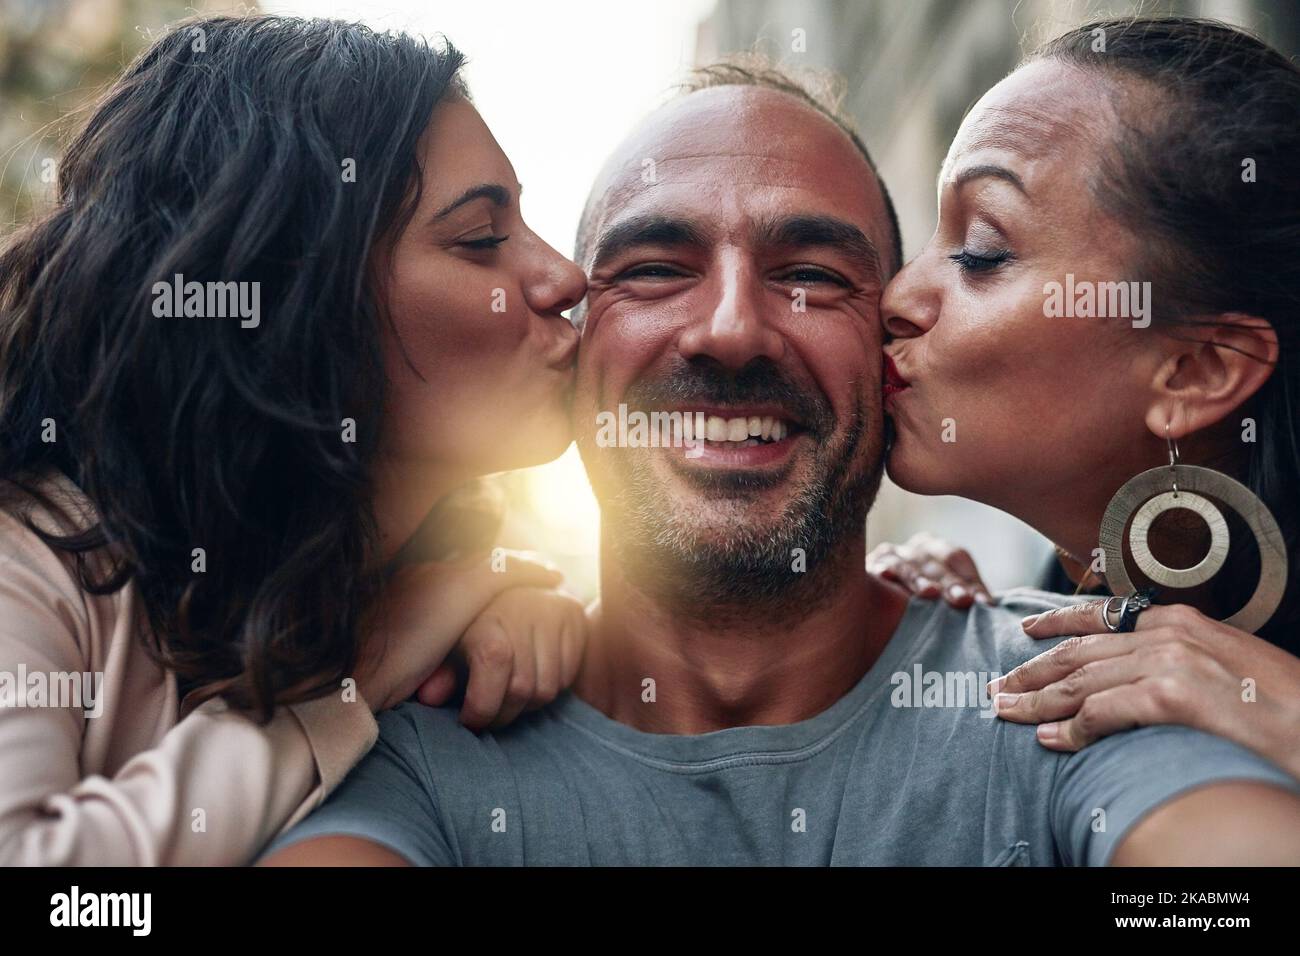 They are all the love I need. two women kissing their male friend on his cheeks. Stock Photo